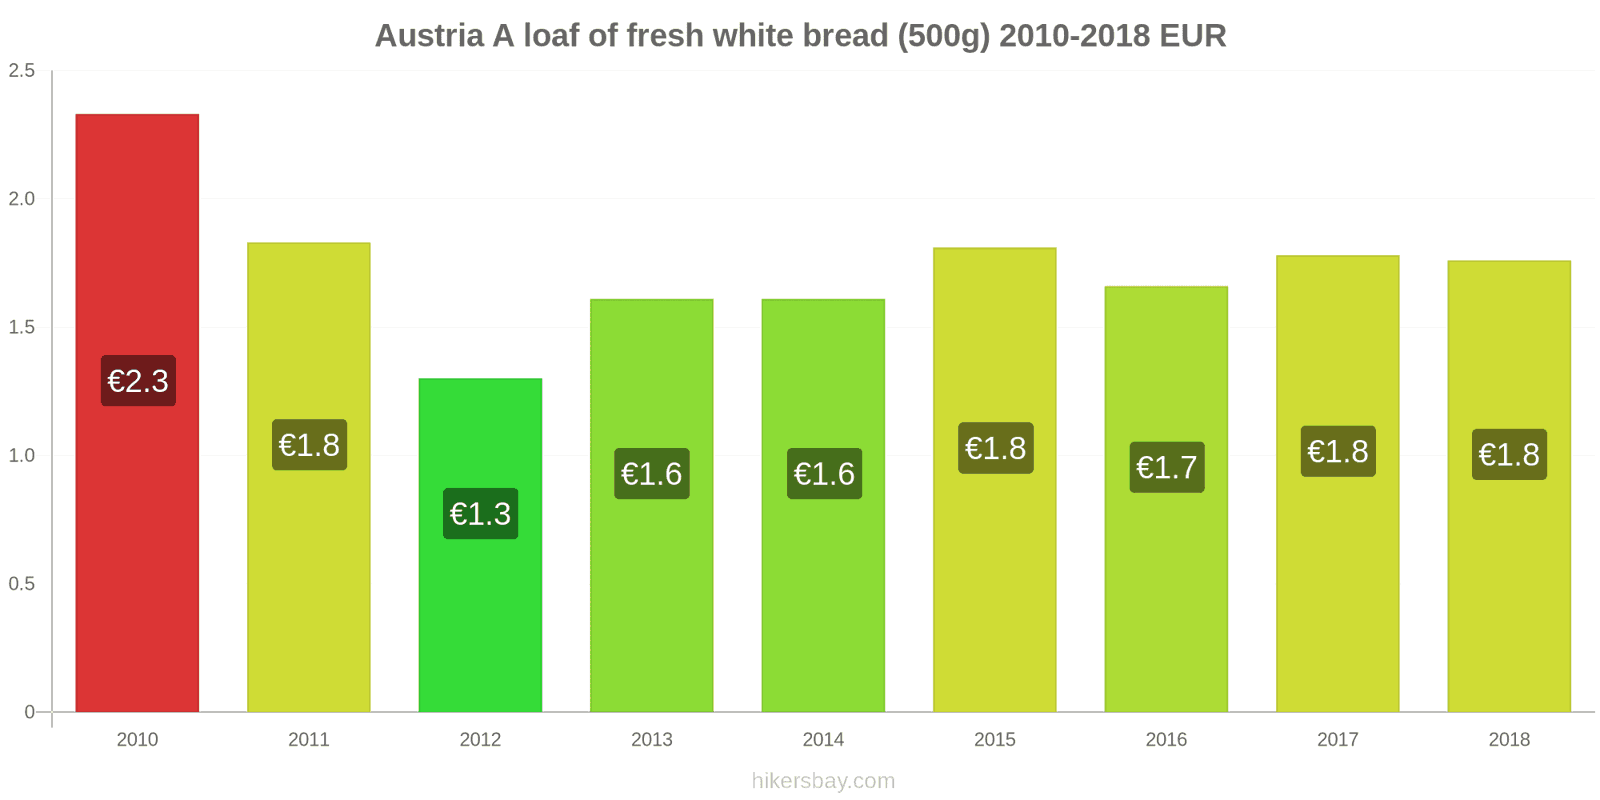 Austria price changes A loaf of fresh white bread (500g) hikersbay.com